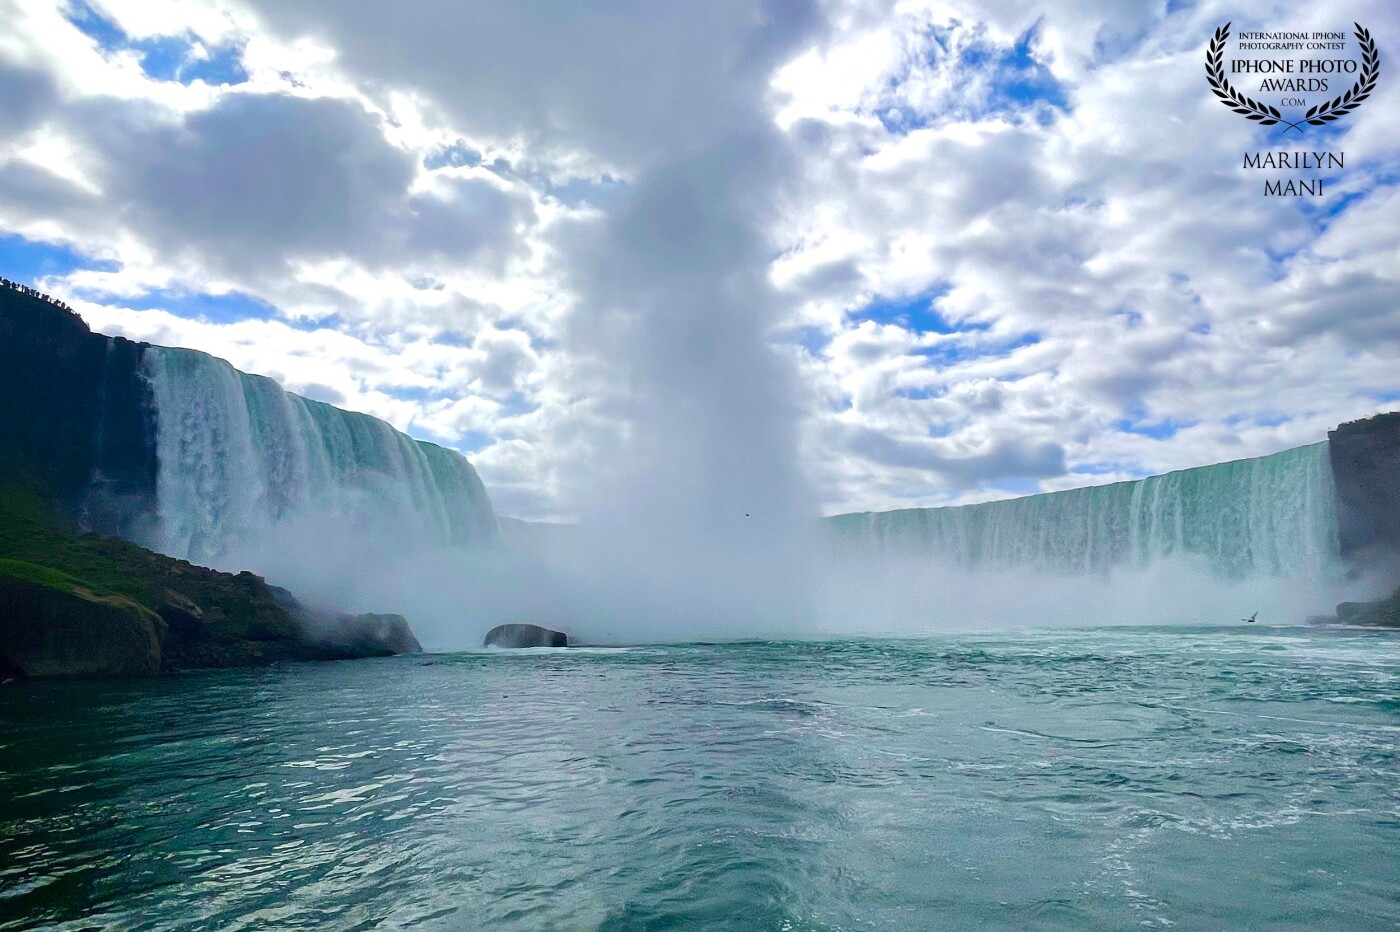 Where river meets the clouds! The magnificent Niagara Falls mist touching the clouds above is a sheer attestation to its mighty force!